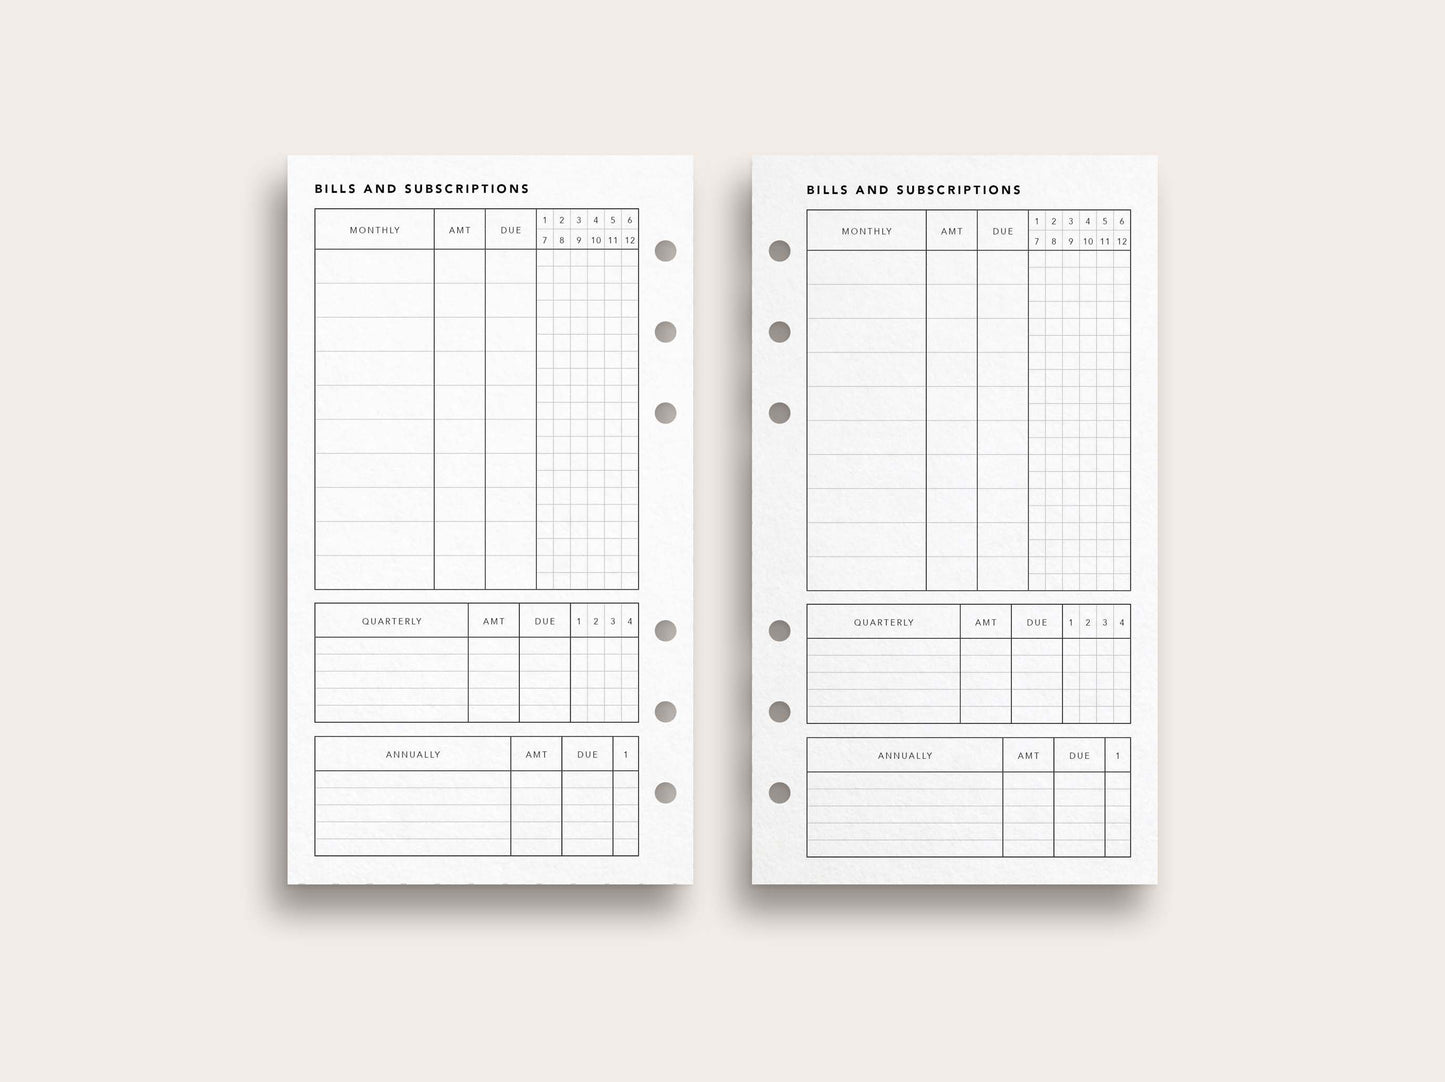 Bill and Subscription Tracker